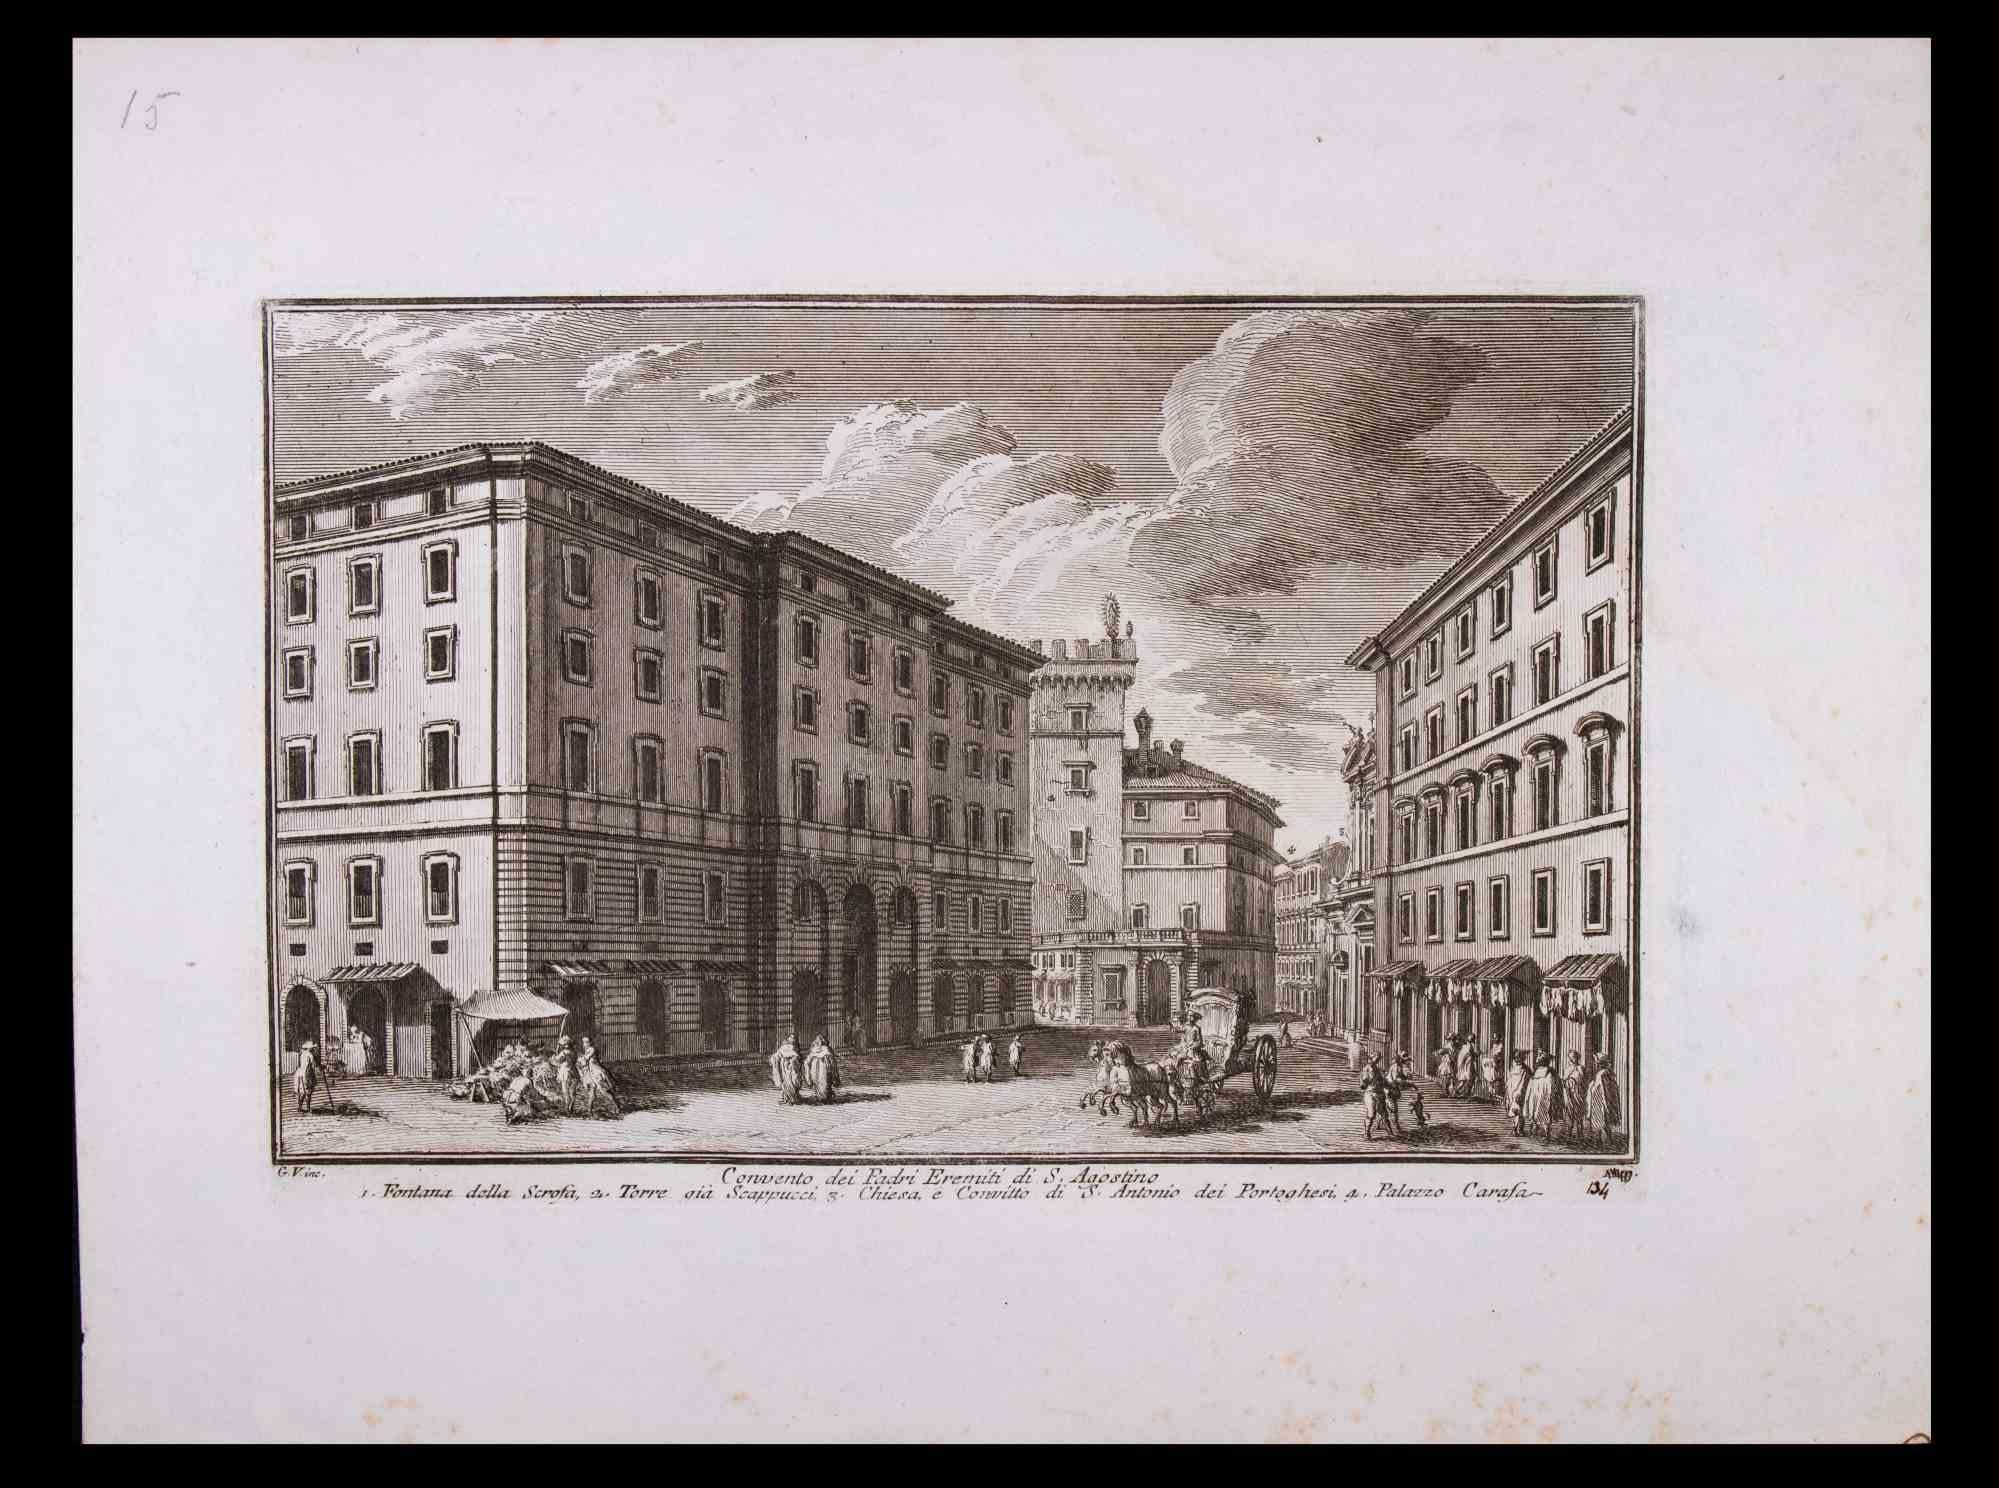 Convento dei Padri Eremiti di S. Agostino is an original black and white etching of the Late 18th century realized by  Giuseppe Vasi.

The beautiful etching represents a glimpse of Rome.

Signed and titled on plate lower margin. Titled on the